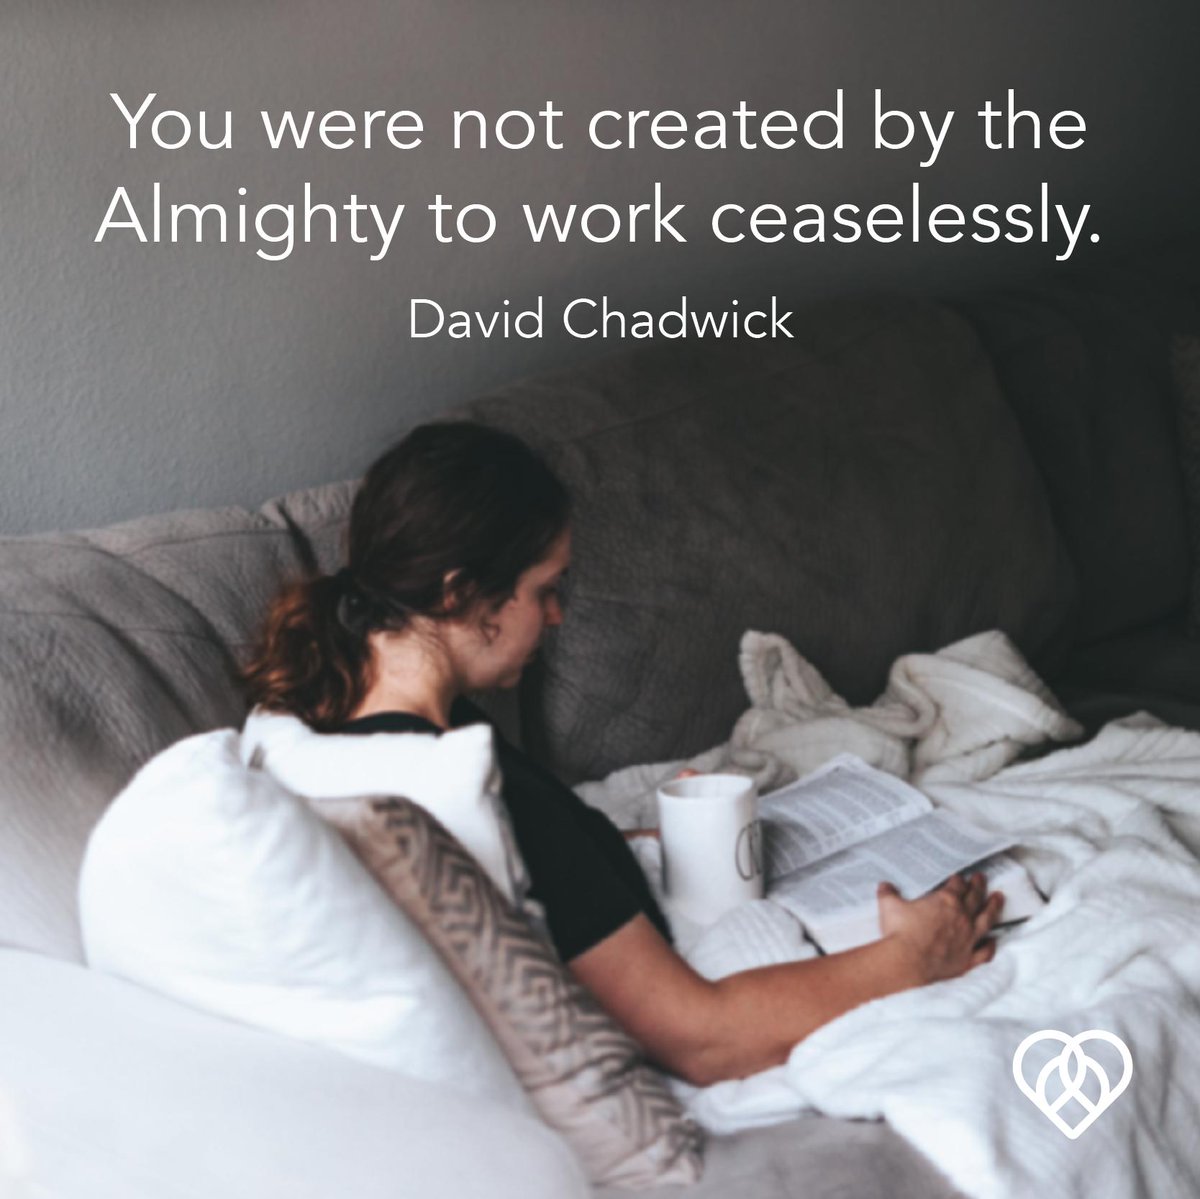 You are not a machine. Make time to #rest. #MomentsofHope